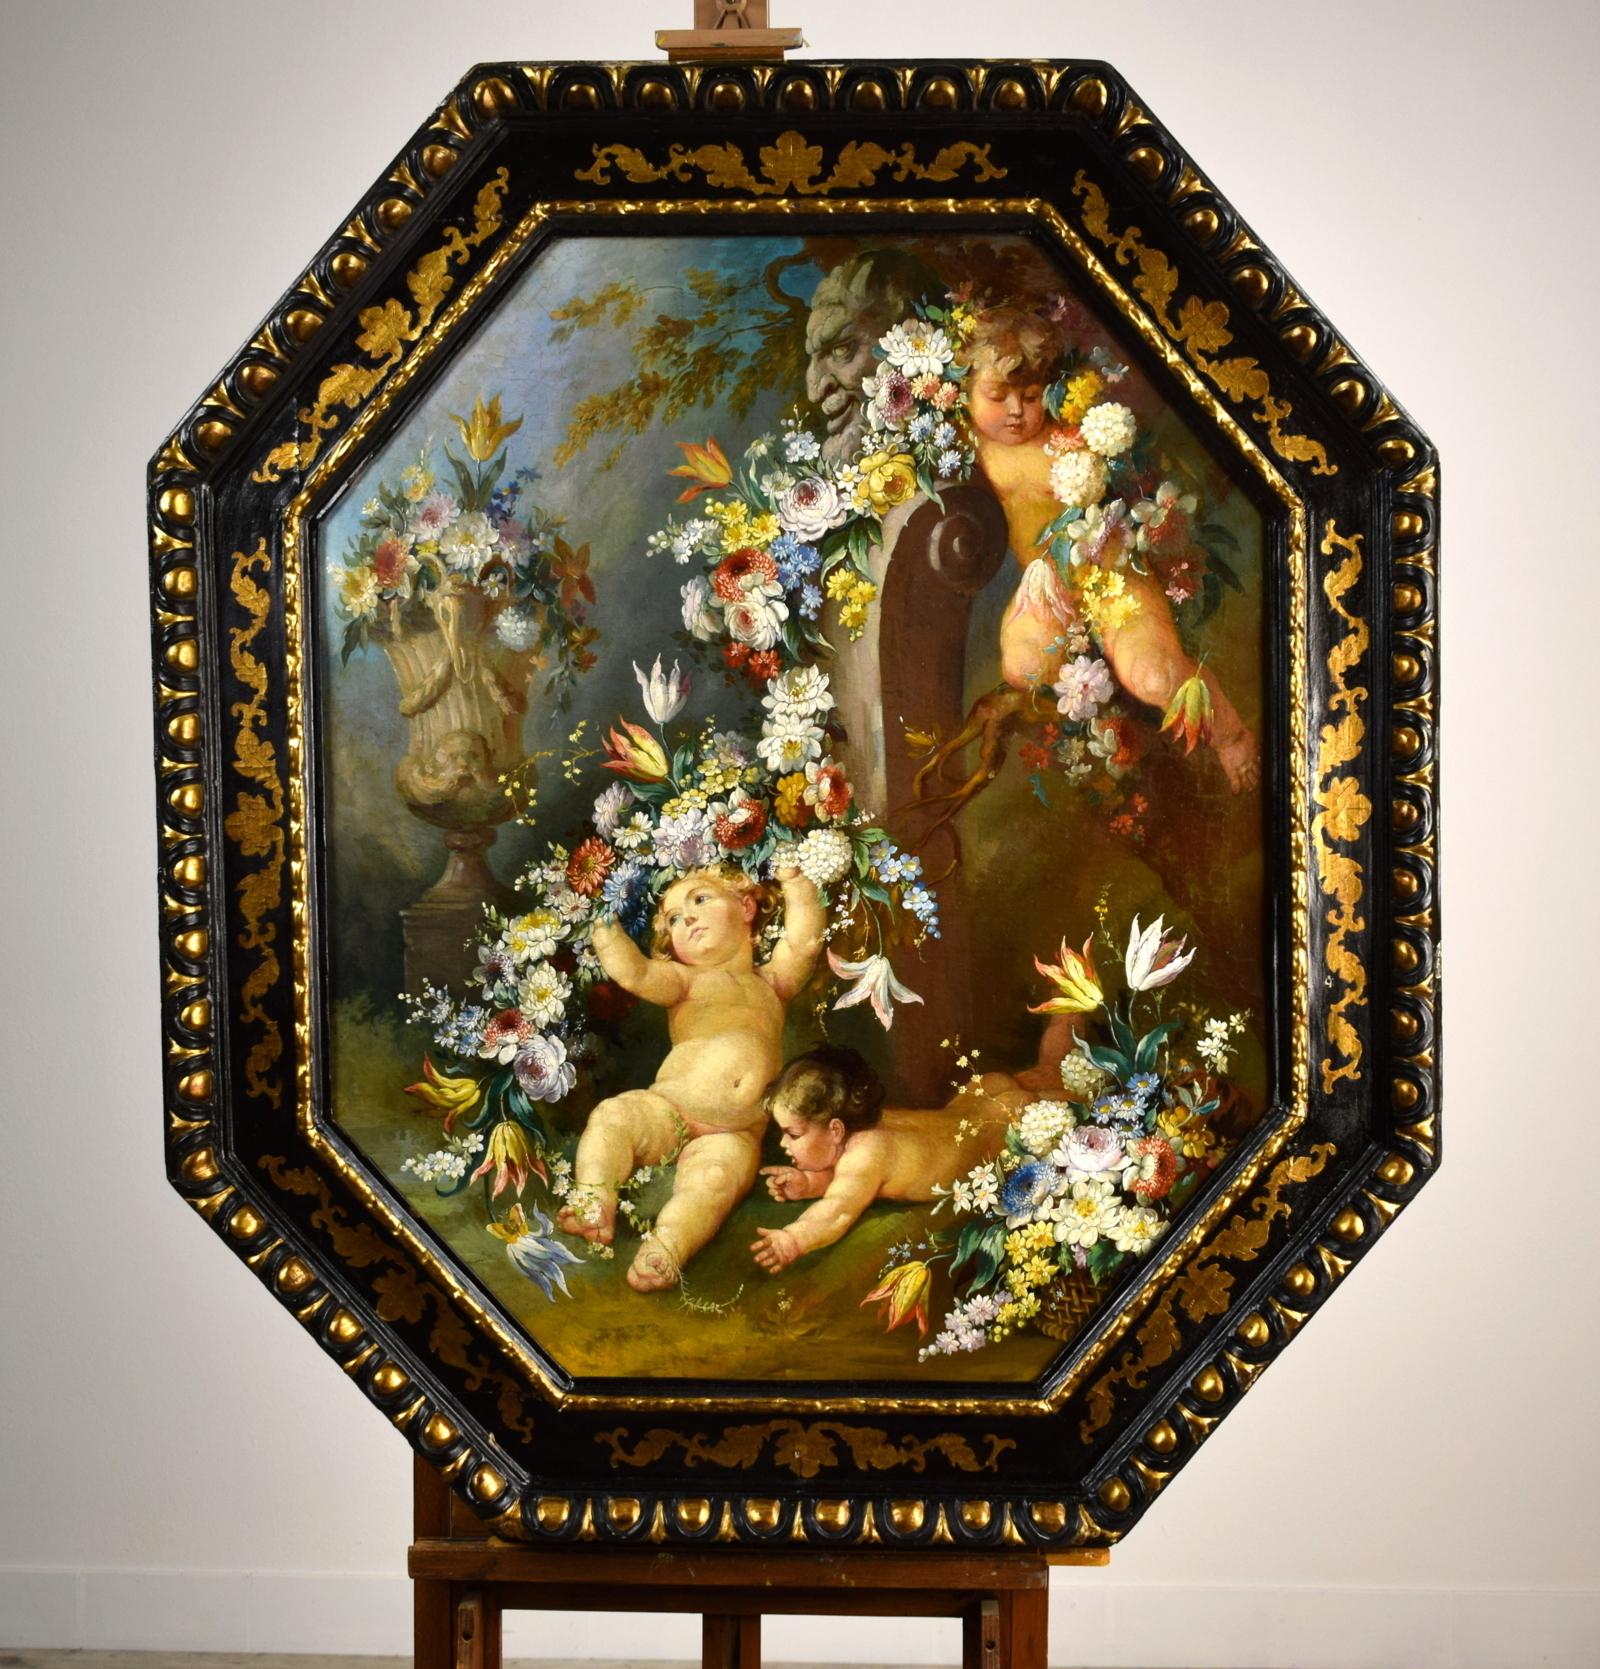 19th century Roman painter

Still life with cherubs, flower festoons and herma with faun

Measures: Oil on canvas, cm H 78 x W 95 without frame
Cm H 122.00 x W 106 x D 8 with frame.


The work, painted in oil on canvas, octagonal in shape,